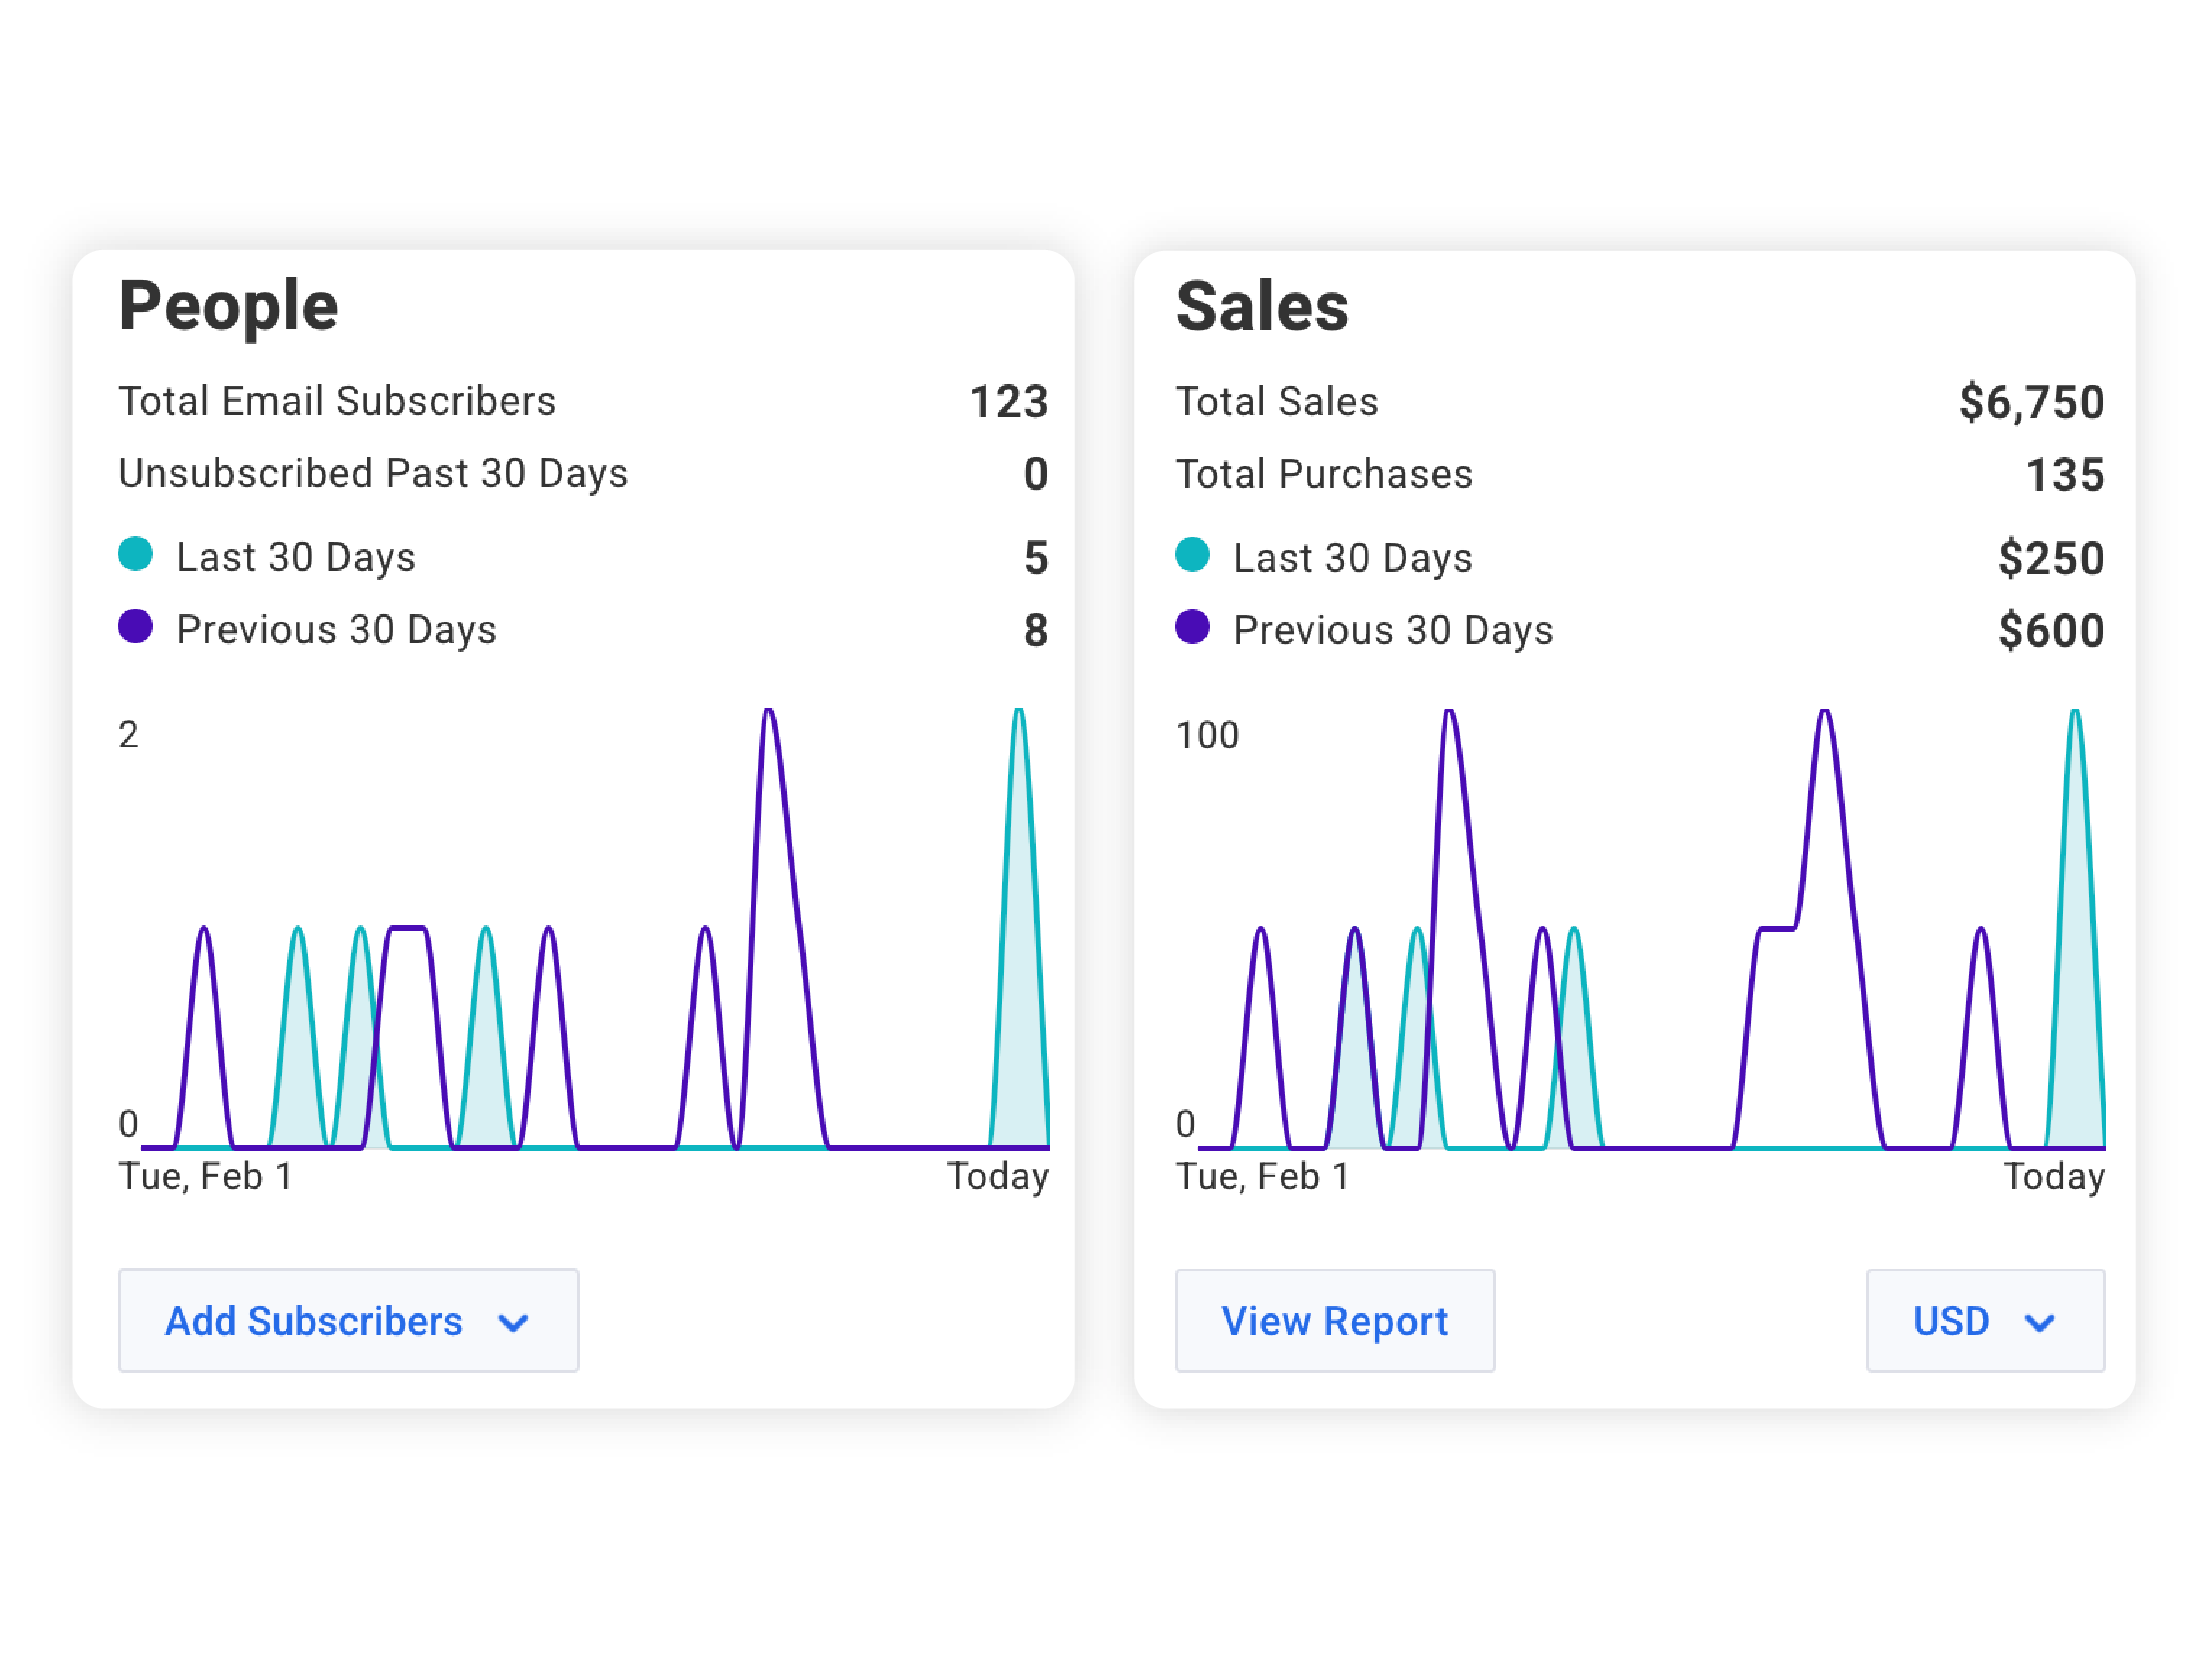 Sales tracking